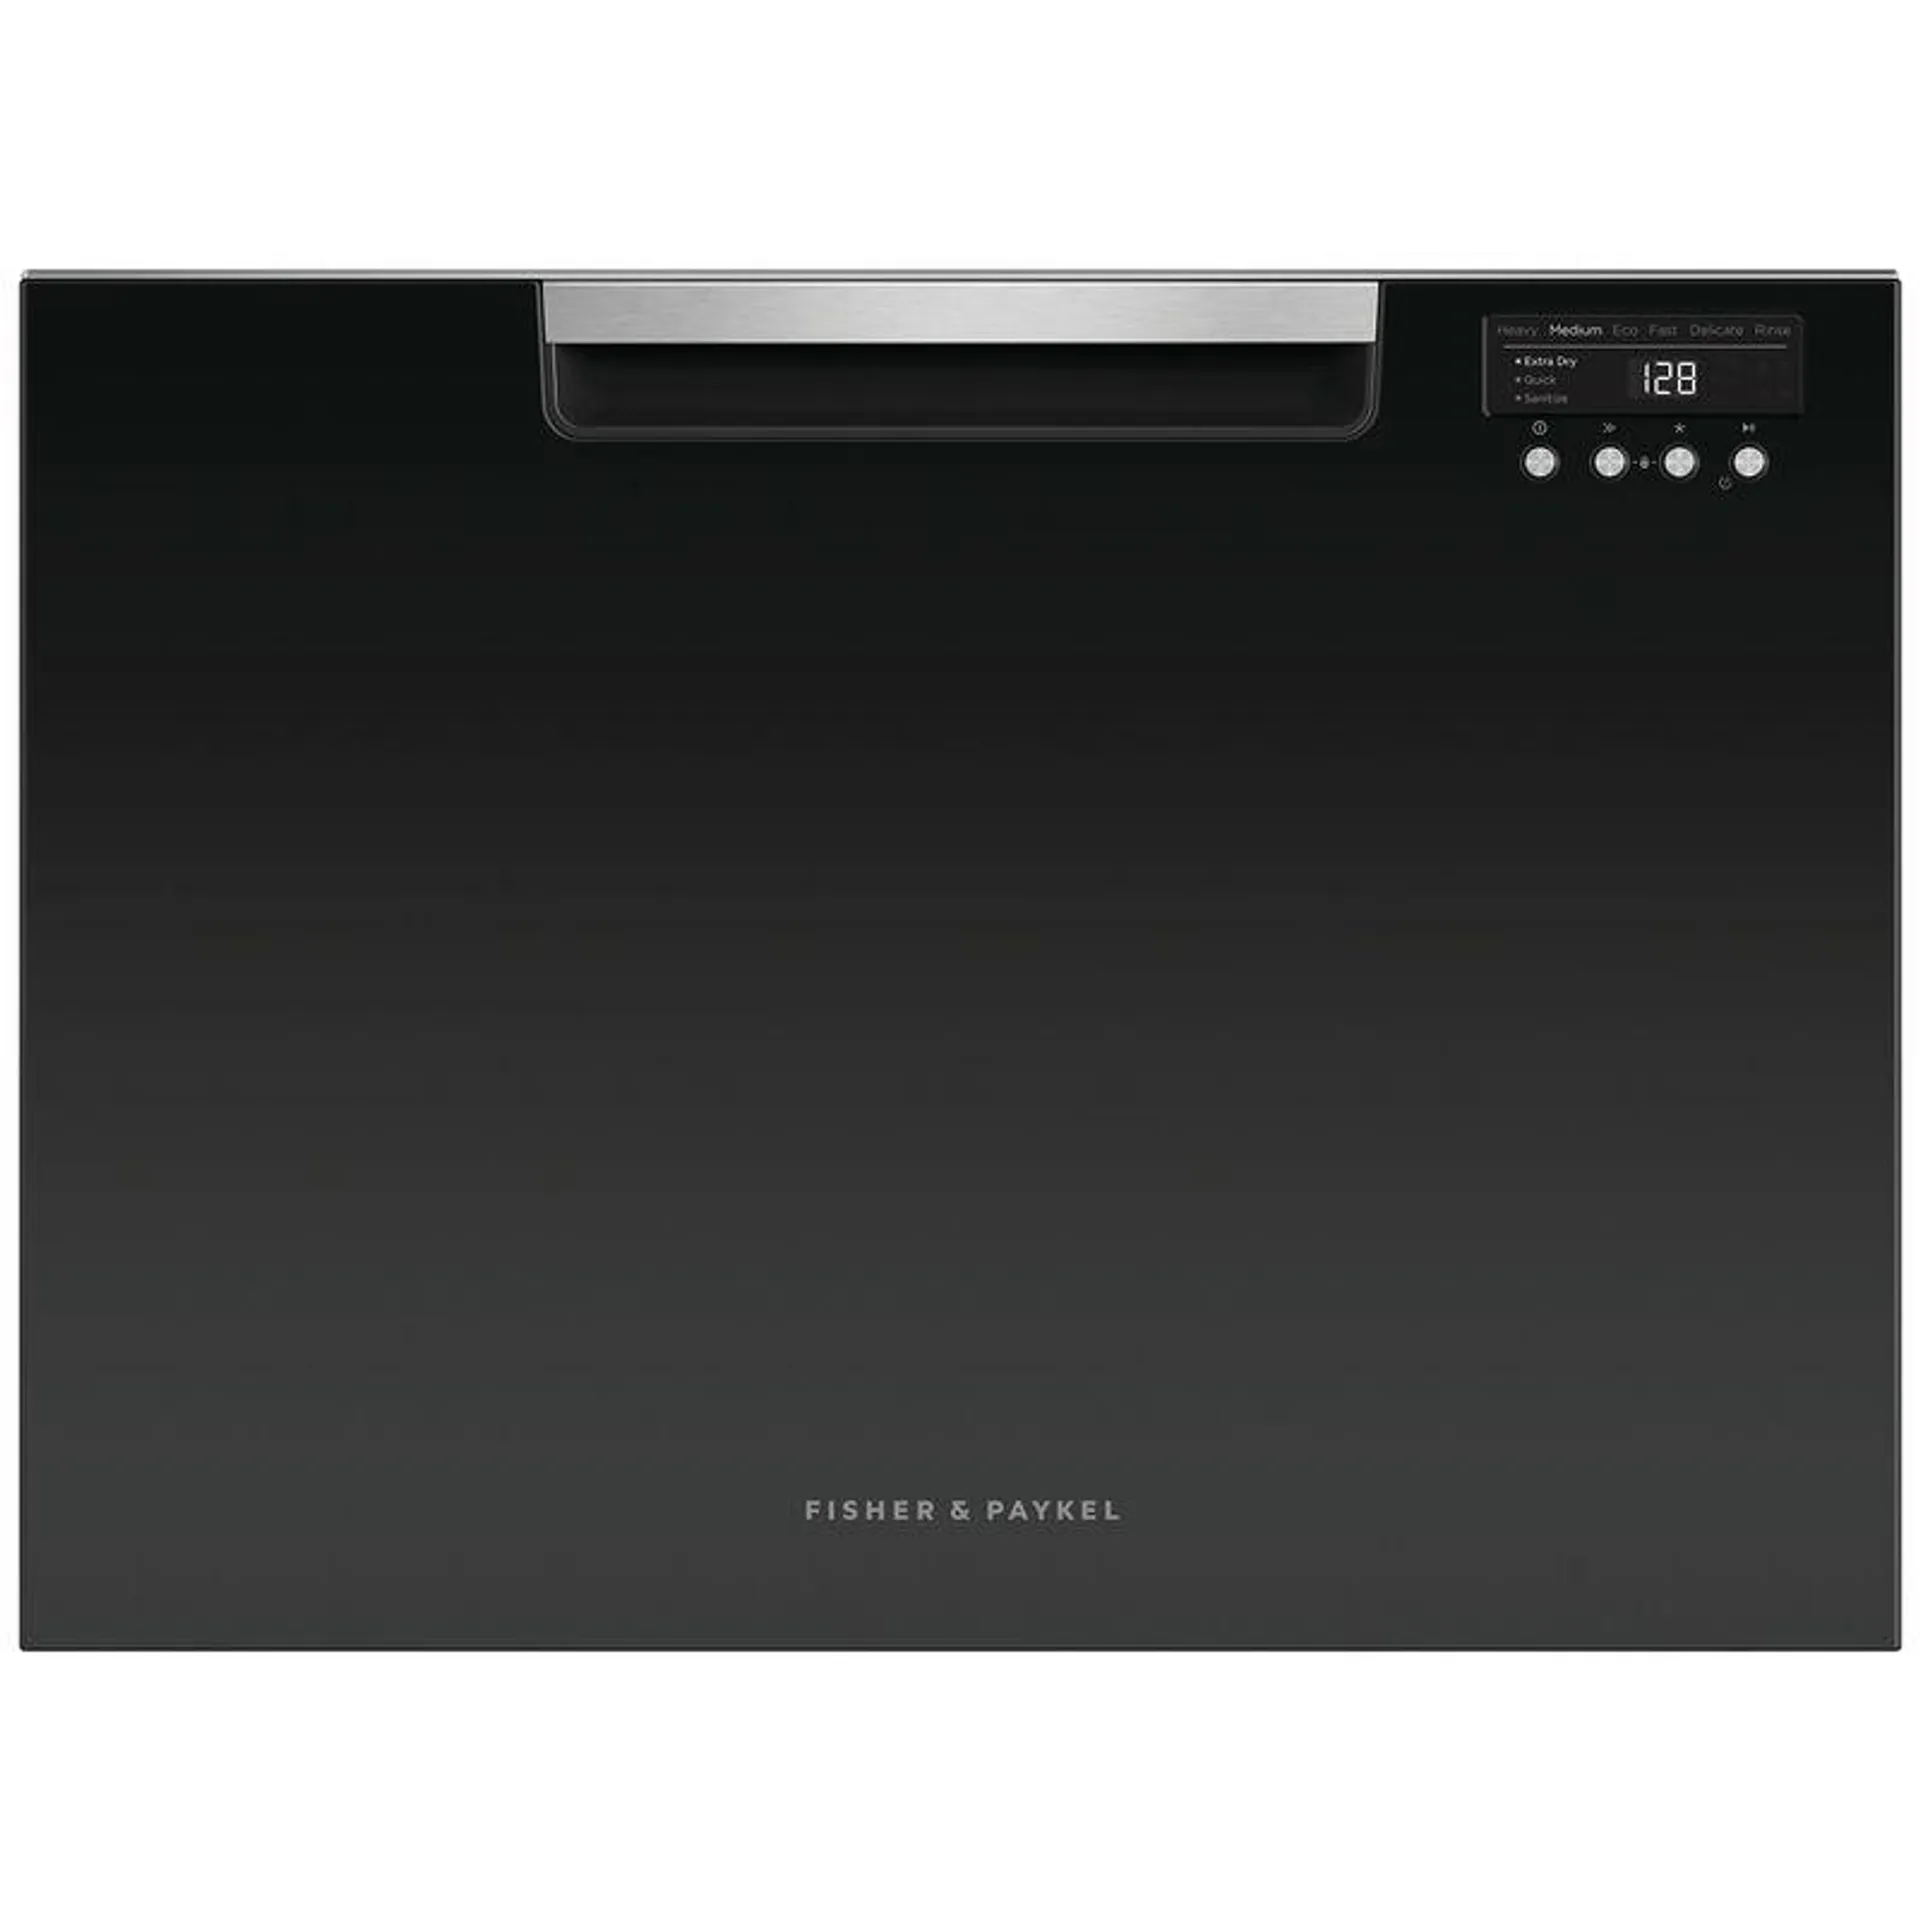 Fisher & Paykel Series 7 24 in. Built-In Drawer Dishwasher with Front Control, 44 dBA Sound Level, 7 Place Settings & Sanitize Cycle - Black